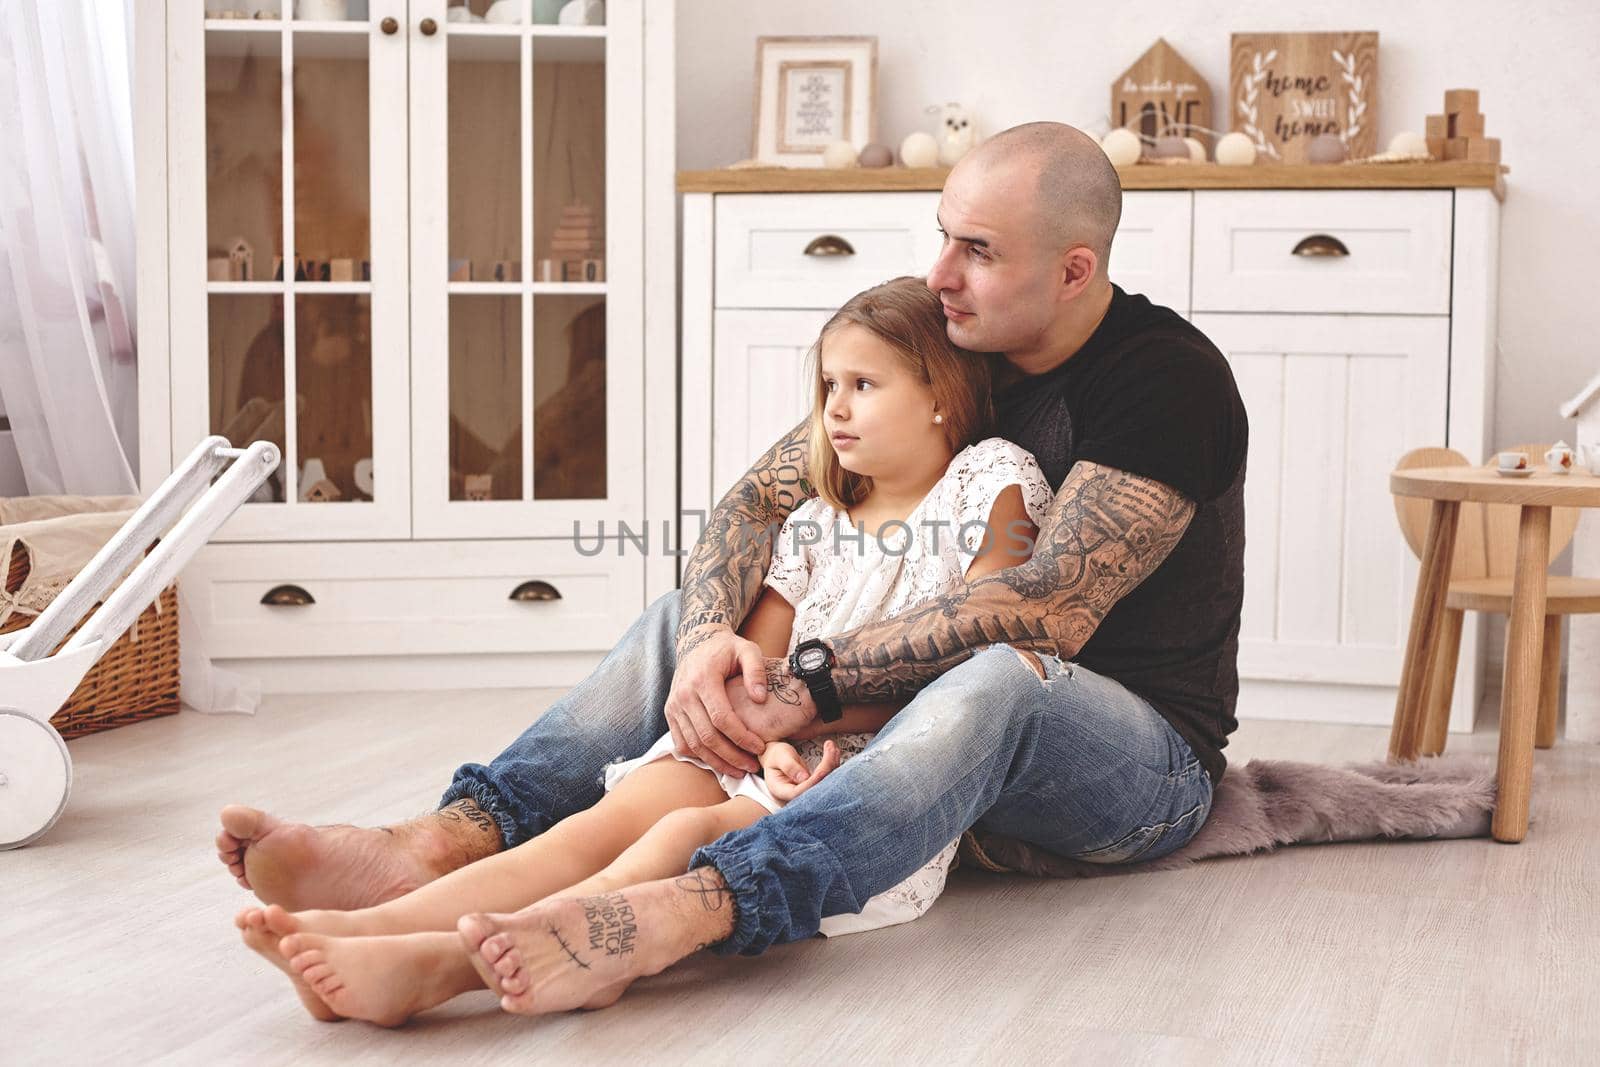 White modern kid's room whith a wooden furniture. Adorable daughter with a long blond hair wearing a white dress. Daddy with tattoos is hugging her and they are looking away. Friendly family spending their free time together sitting on a pillows.